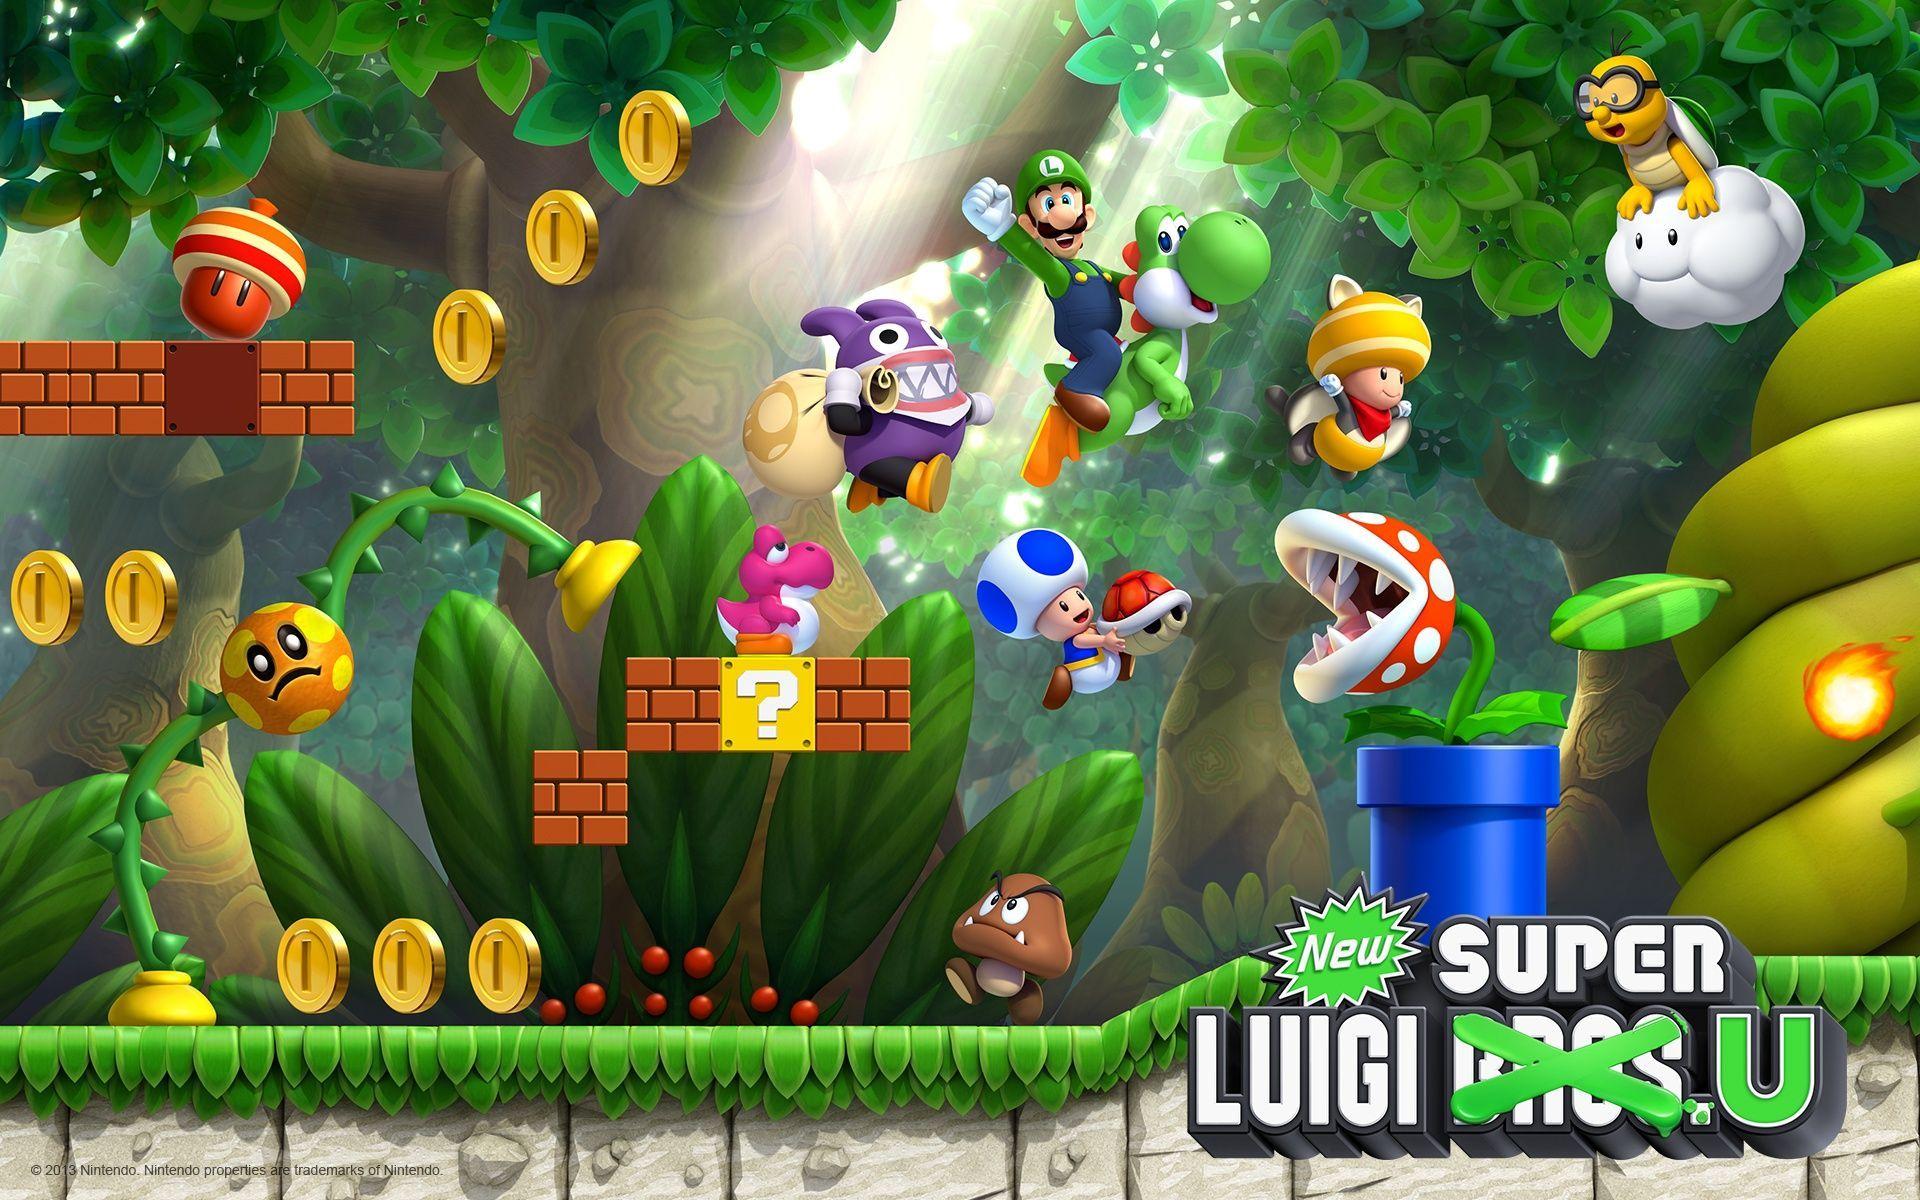 super mario brothers for pc free download